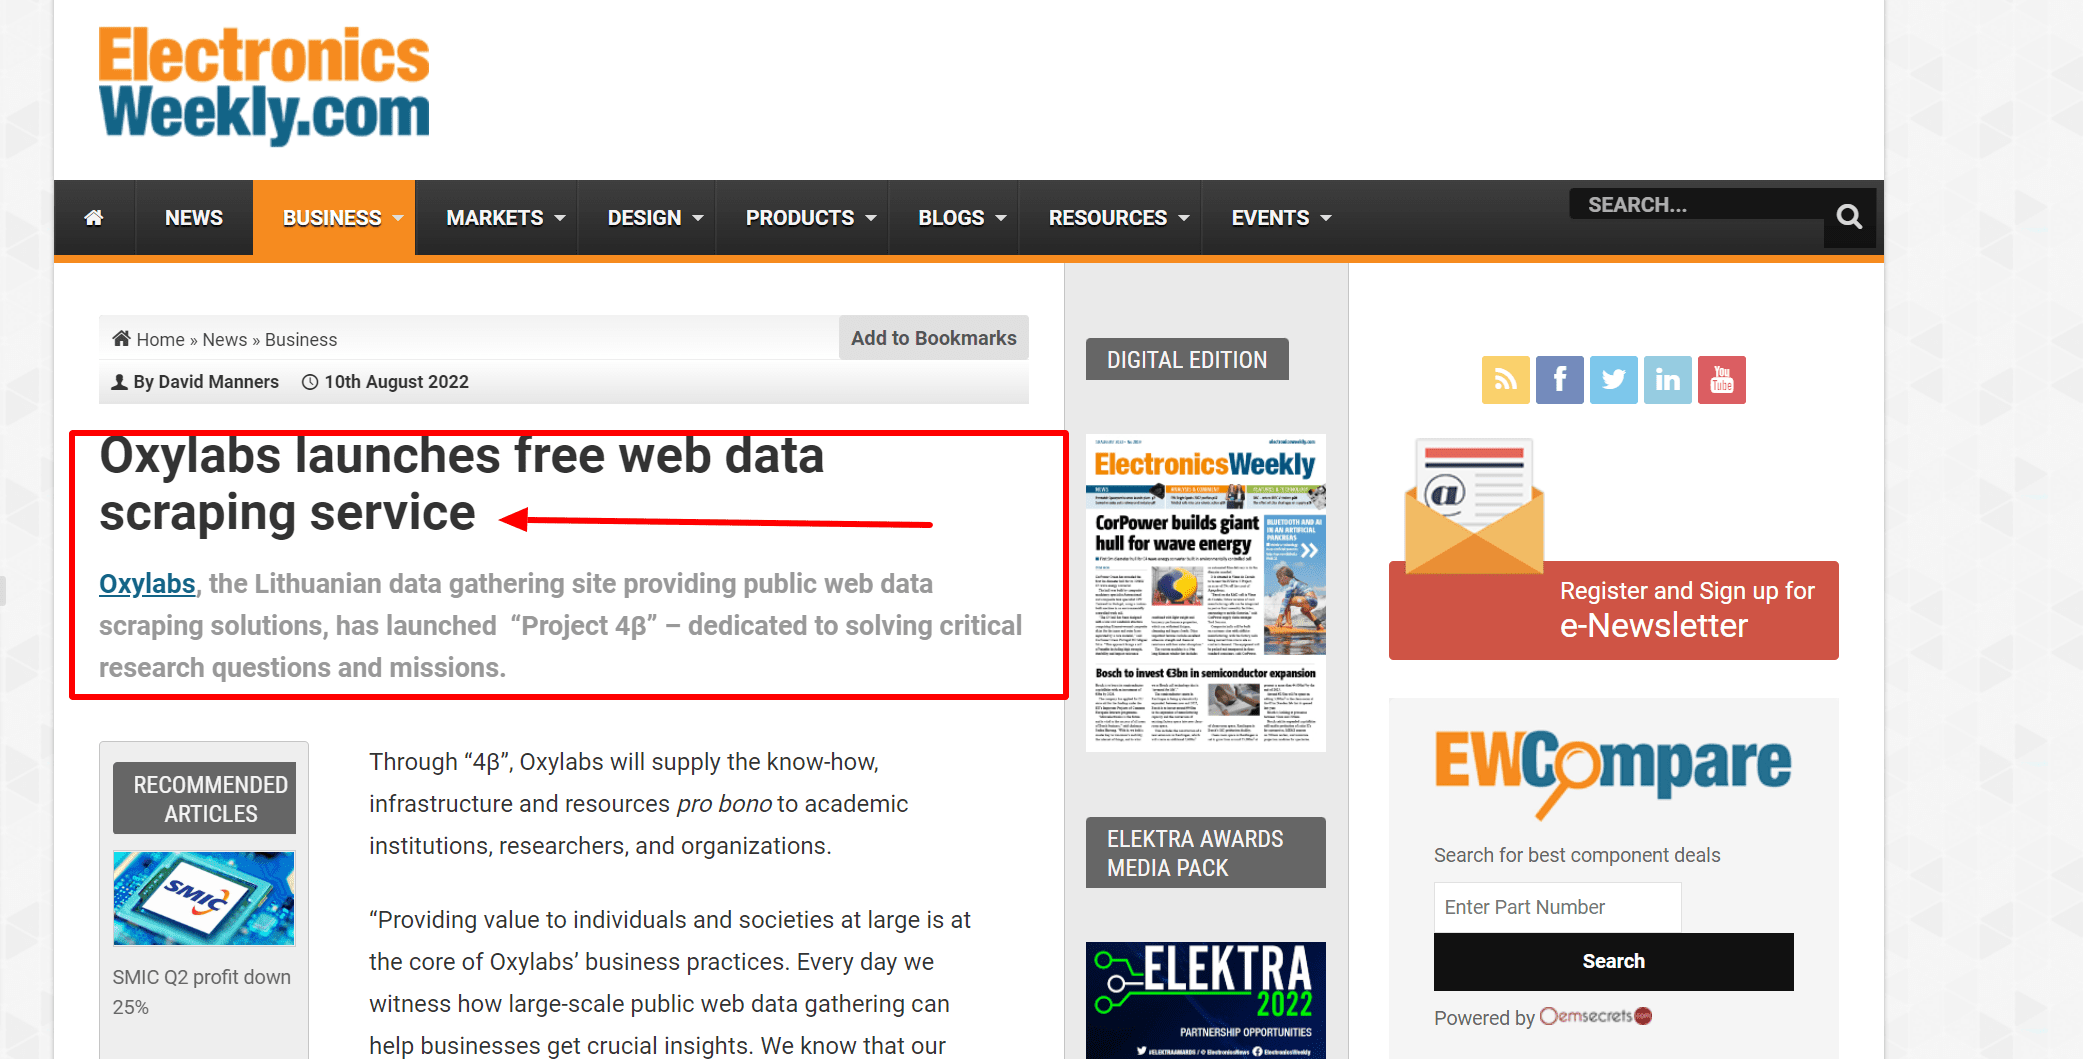 Oxylabs launches free web data scraping service